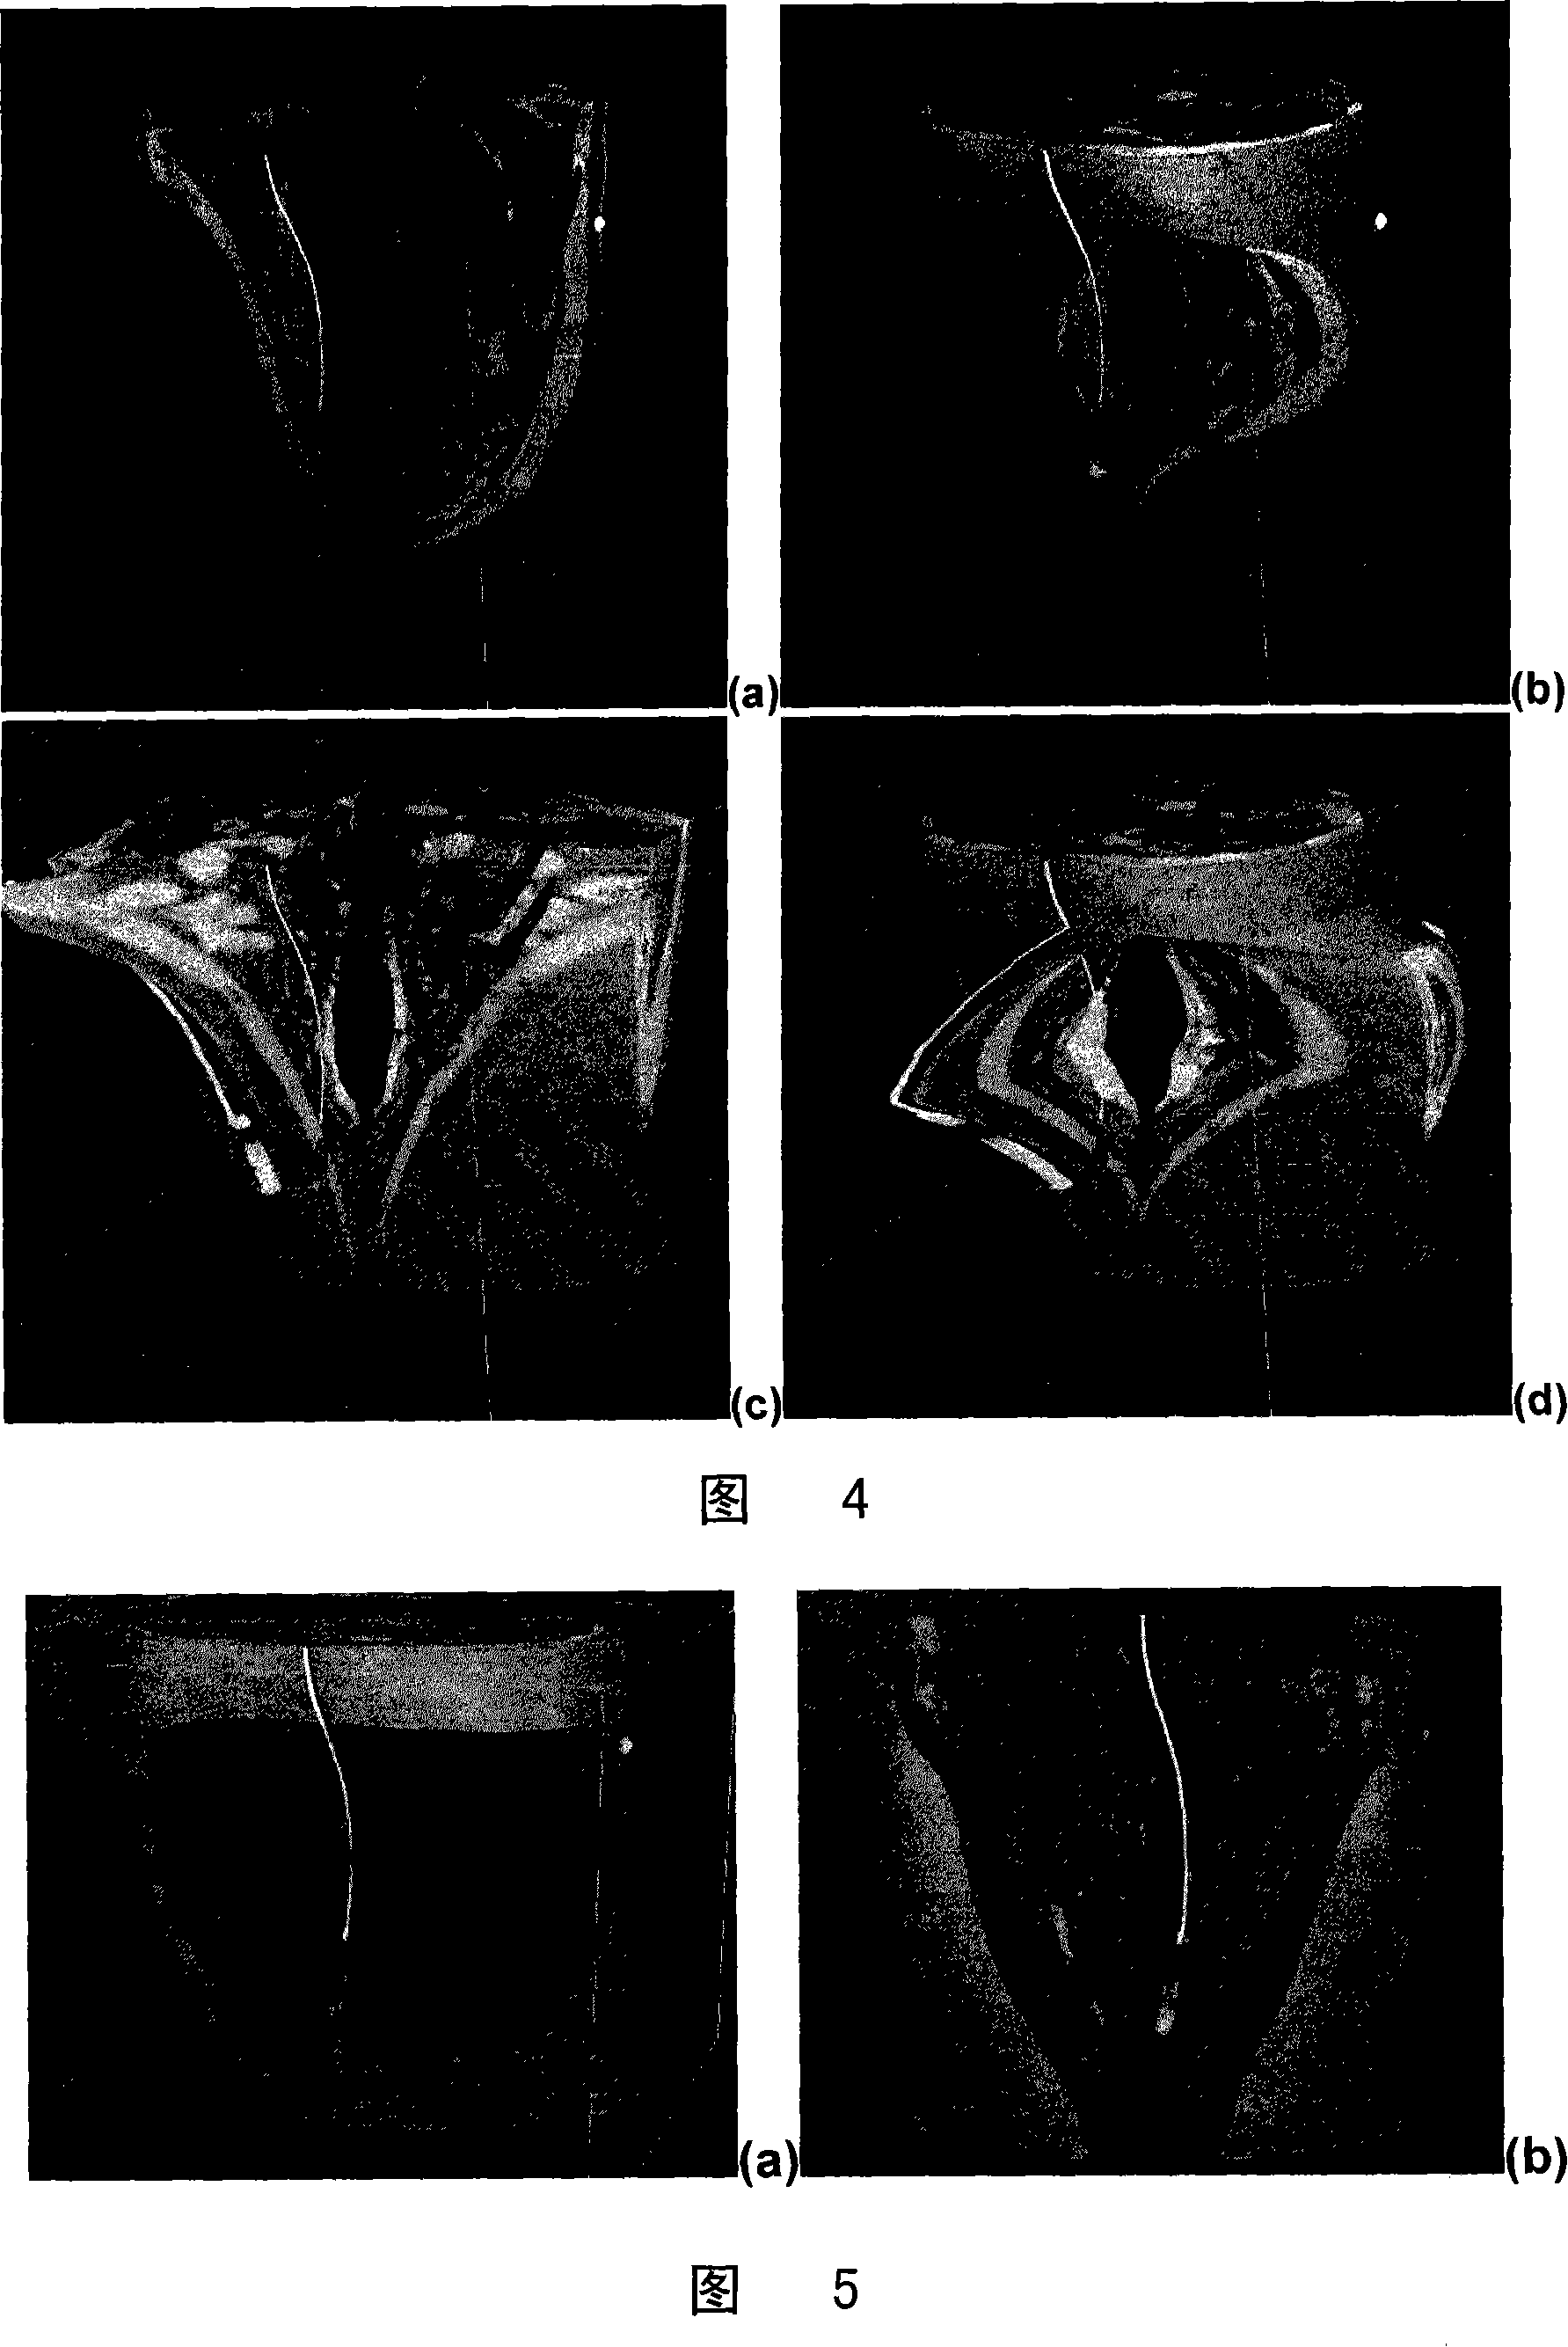 System and method for in-context volume visualization using virtual incision